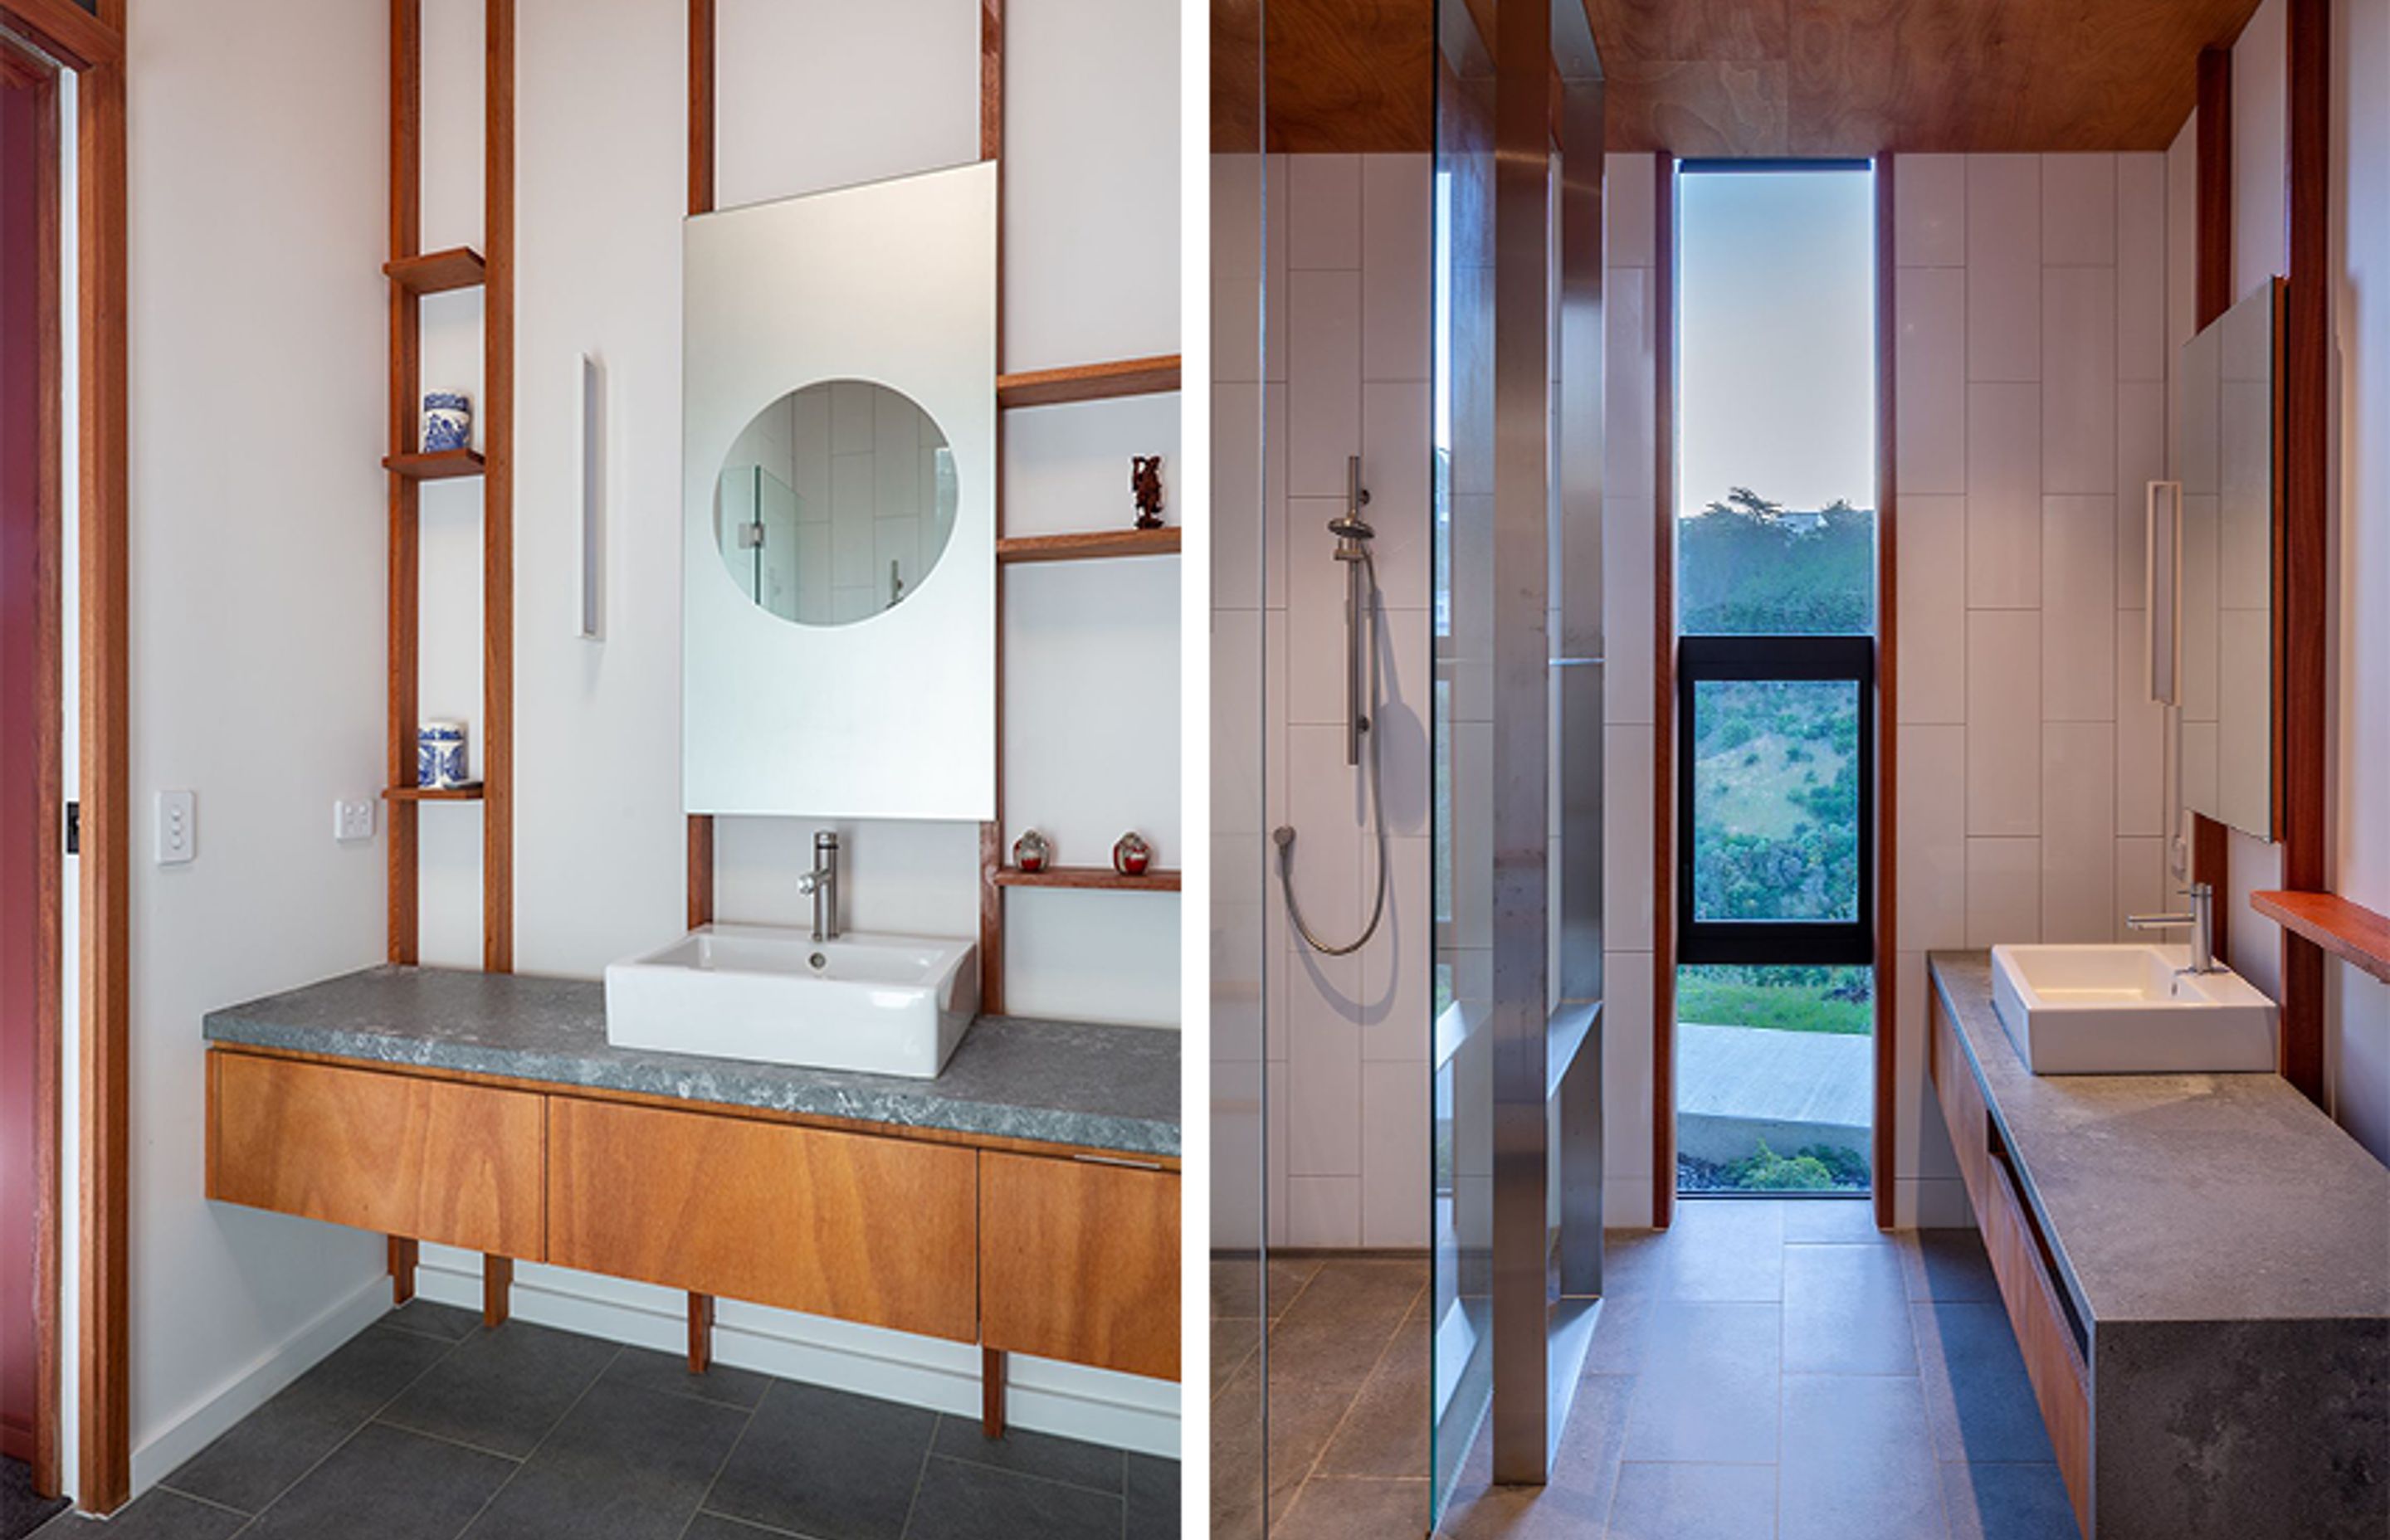 In accordance with the homeowners' love of Asian art and style, the bathrooms exhibit a very modern Japanese aesthetic, featuring wood and stone with a neutral backdrop and ample natural light.